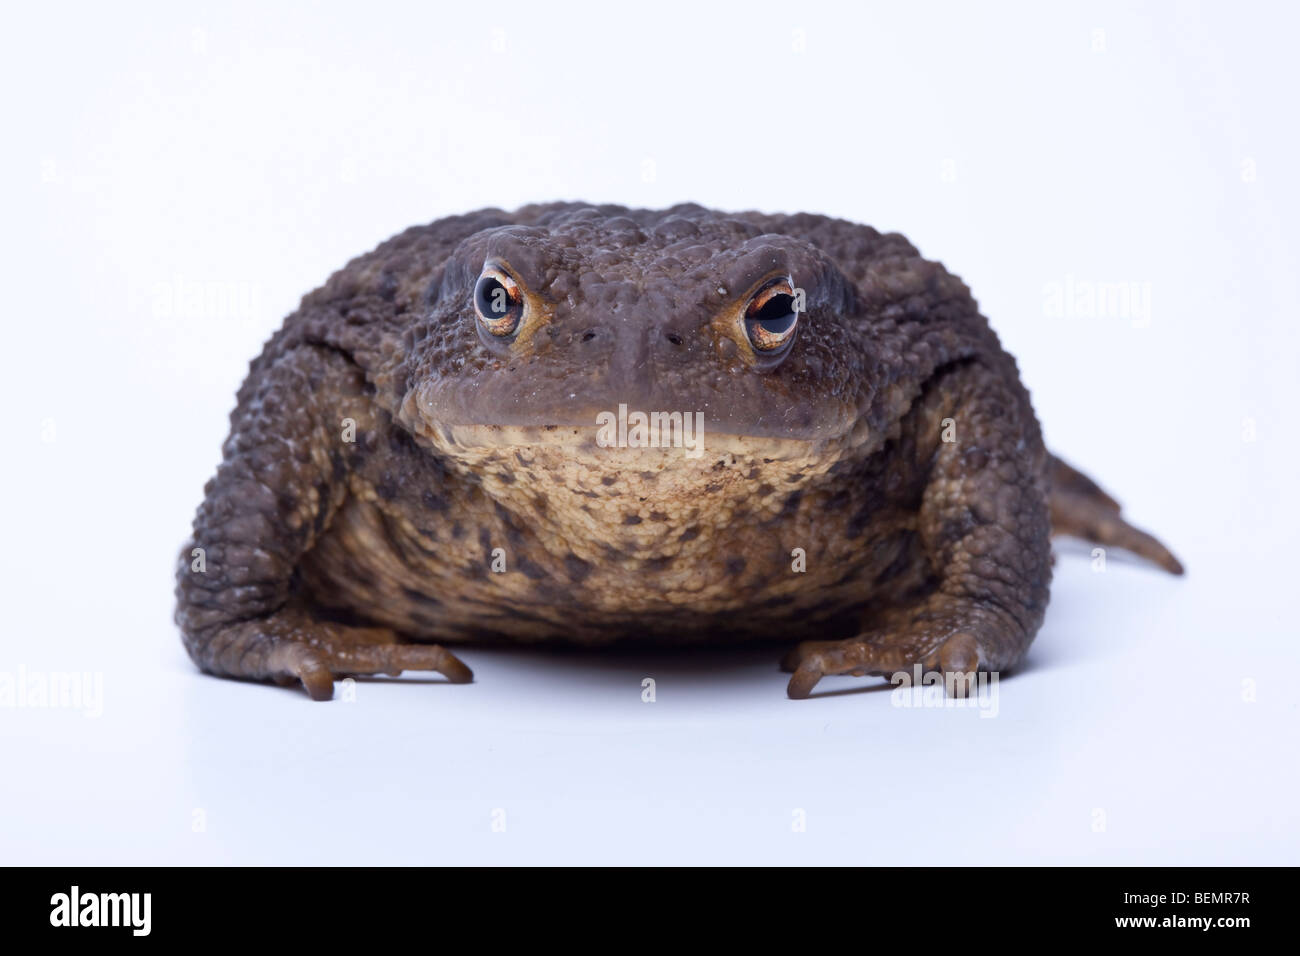 Common Toad on white background Stock Photo